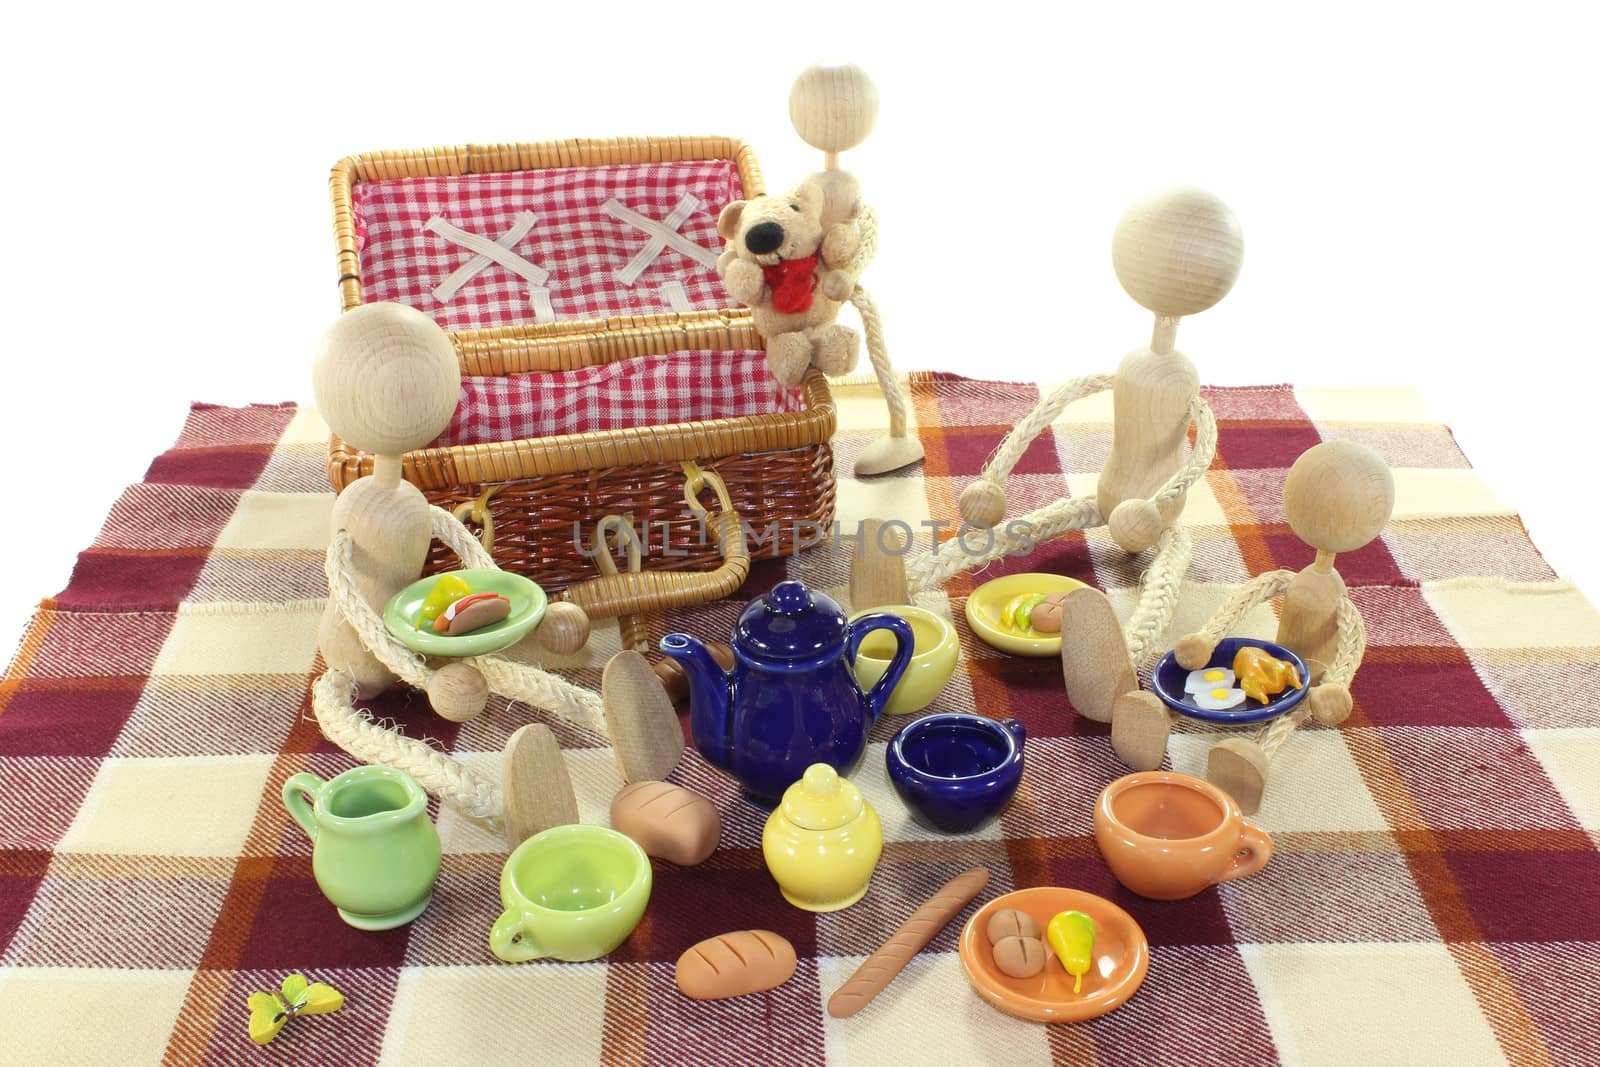 Picnic with family, wicker basket, blanket and dishes on a light background